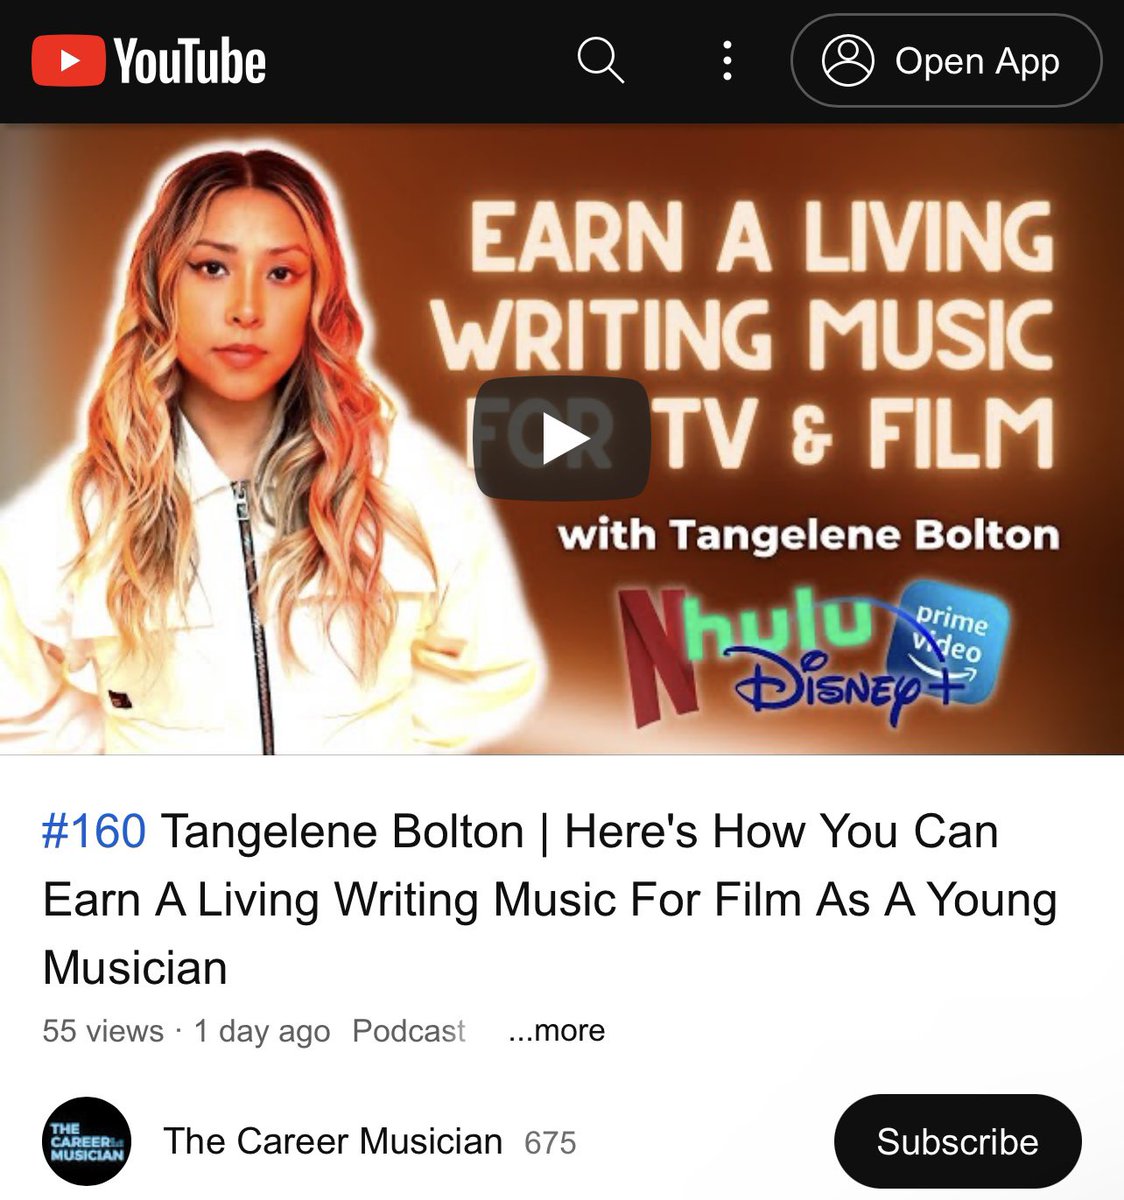 If you are an aspiring film/TV #composer looking to break into the industry, I recommend checking out #TheCareerMusician where we talk the journey and all things #WarriorNun

youtu.be/kJ_sukqj08A

#HaloBearers #SaveWarriorNun #filmcomposer #tvcomposer #filmmusic #womeninmusic